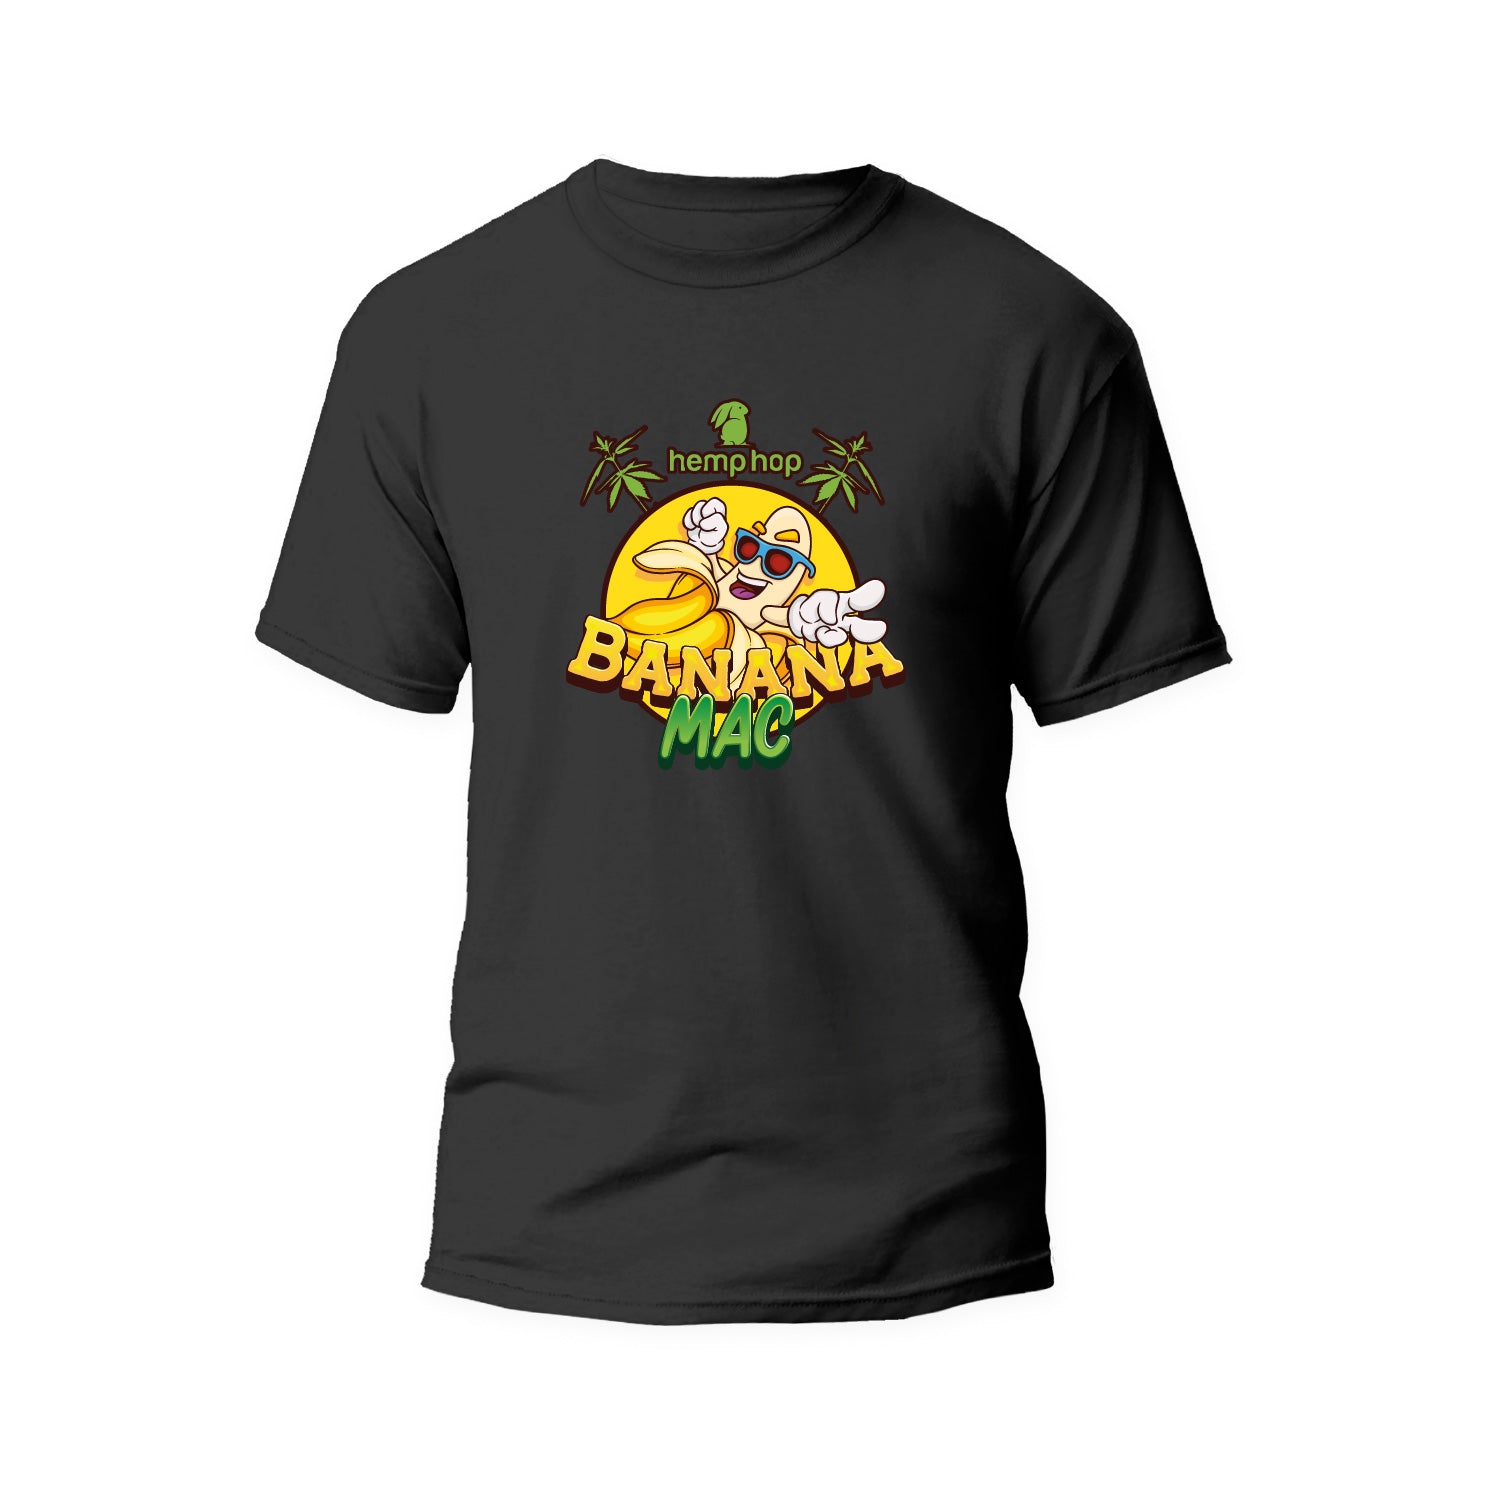 Herbie in the field - limited T-Shirt design